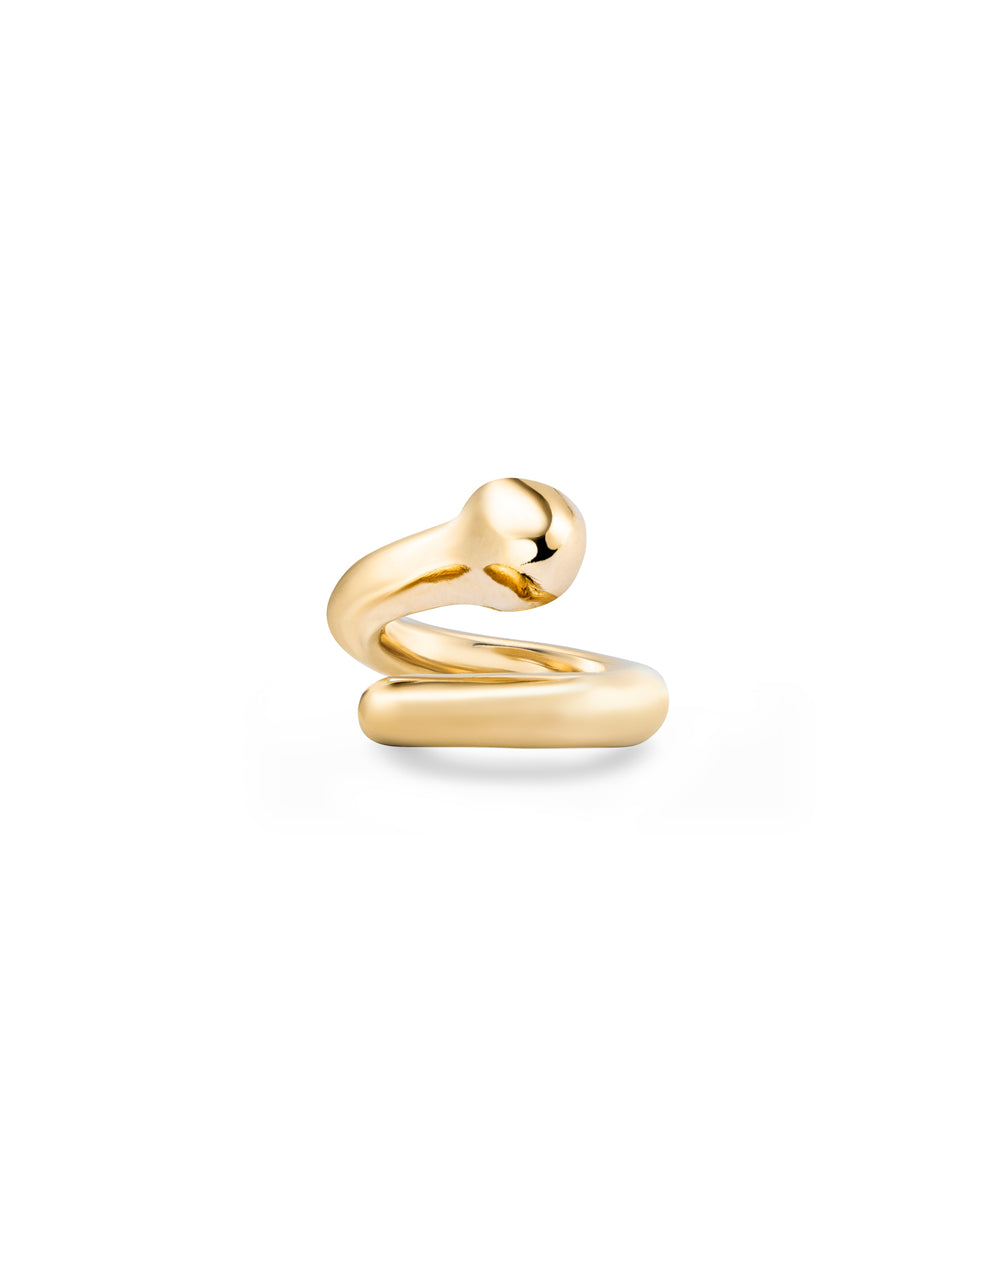 COMEBACK RING-GOLD - Kingfisher Road - Online Boutique